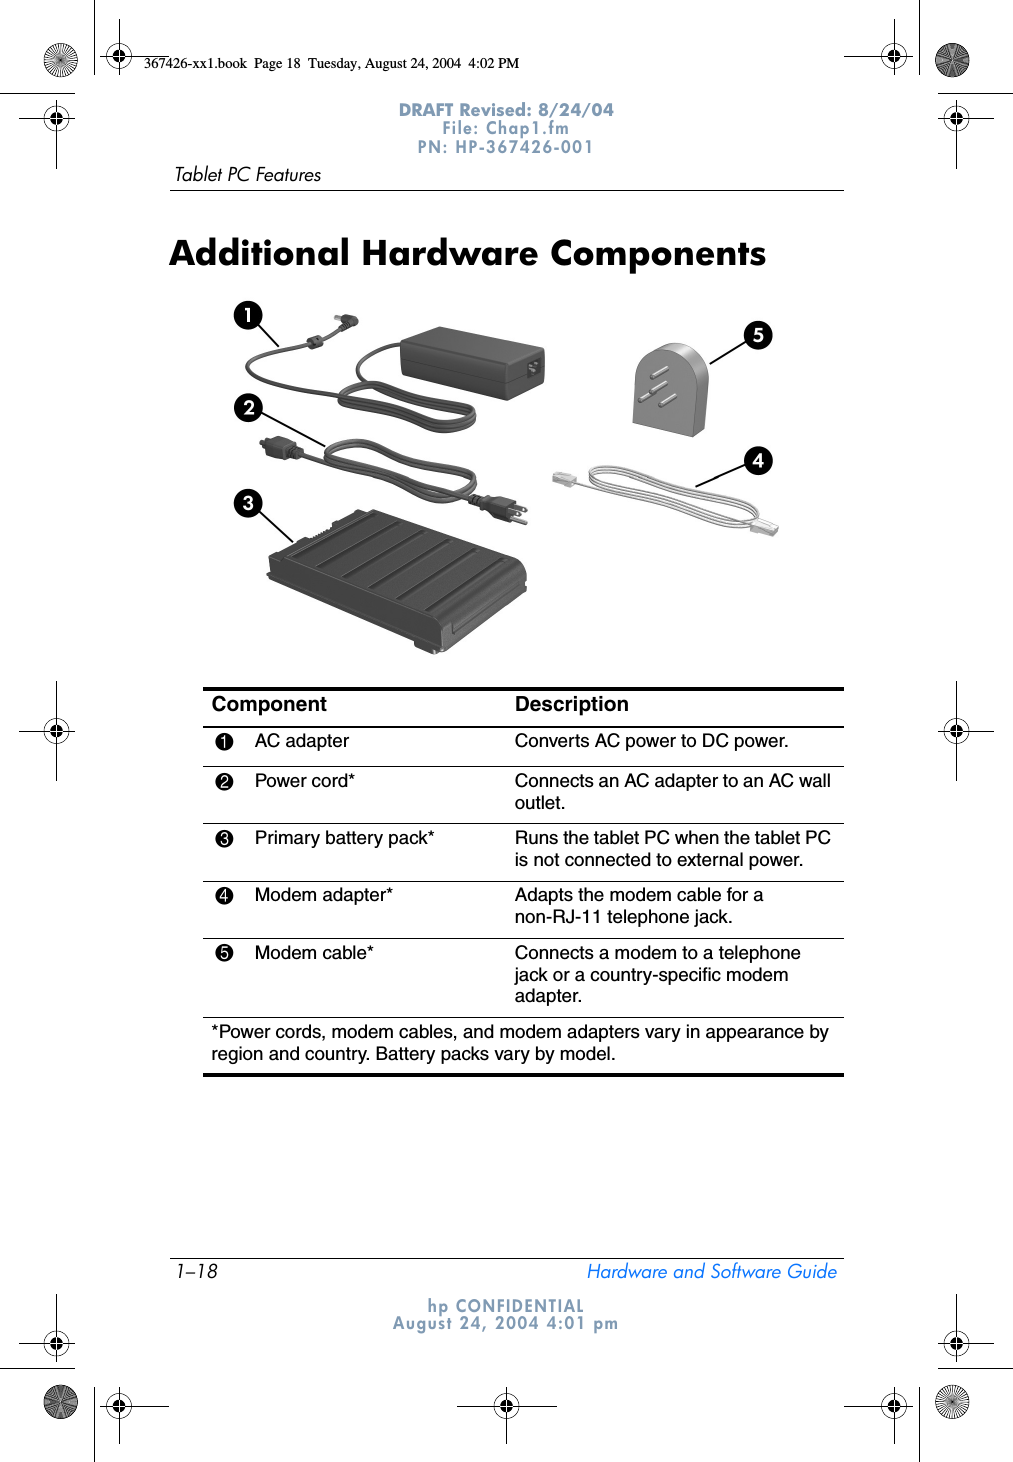 1–18 Hardware and Software GuideTablet PC FeaturesDRAFT Revised: 8/24/04File: Chap1.fm PN: HP-367426-001 hp CONFIDENTIALAugust 24, 2004 4:01 pmAdditional Hardware ComponentsComponent Description1AC adapter Converts AC power to DC power.2Power cord* Connects an AC adapter to an AC wall outlet.3Primary battery pack* Runs the tablet PC when the tablet PC is not connected to external power.4Modem adapter* Adapts the modem cable for a non-RJ-11 telephone jack.5Modem cable* Connects a modem to a telephone jack or a country-specific modem adapter.*Power cords, modem cables, and modem adapters vary in appearance by region and country. Battery packs vary by model.367426-xx1.book  Page 18  Tuesday, August 24, 2004  4:02 PM